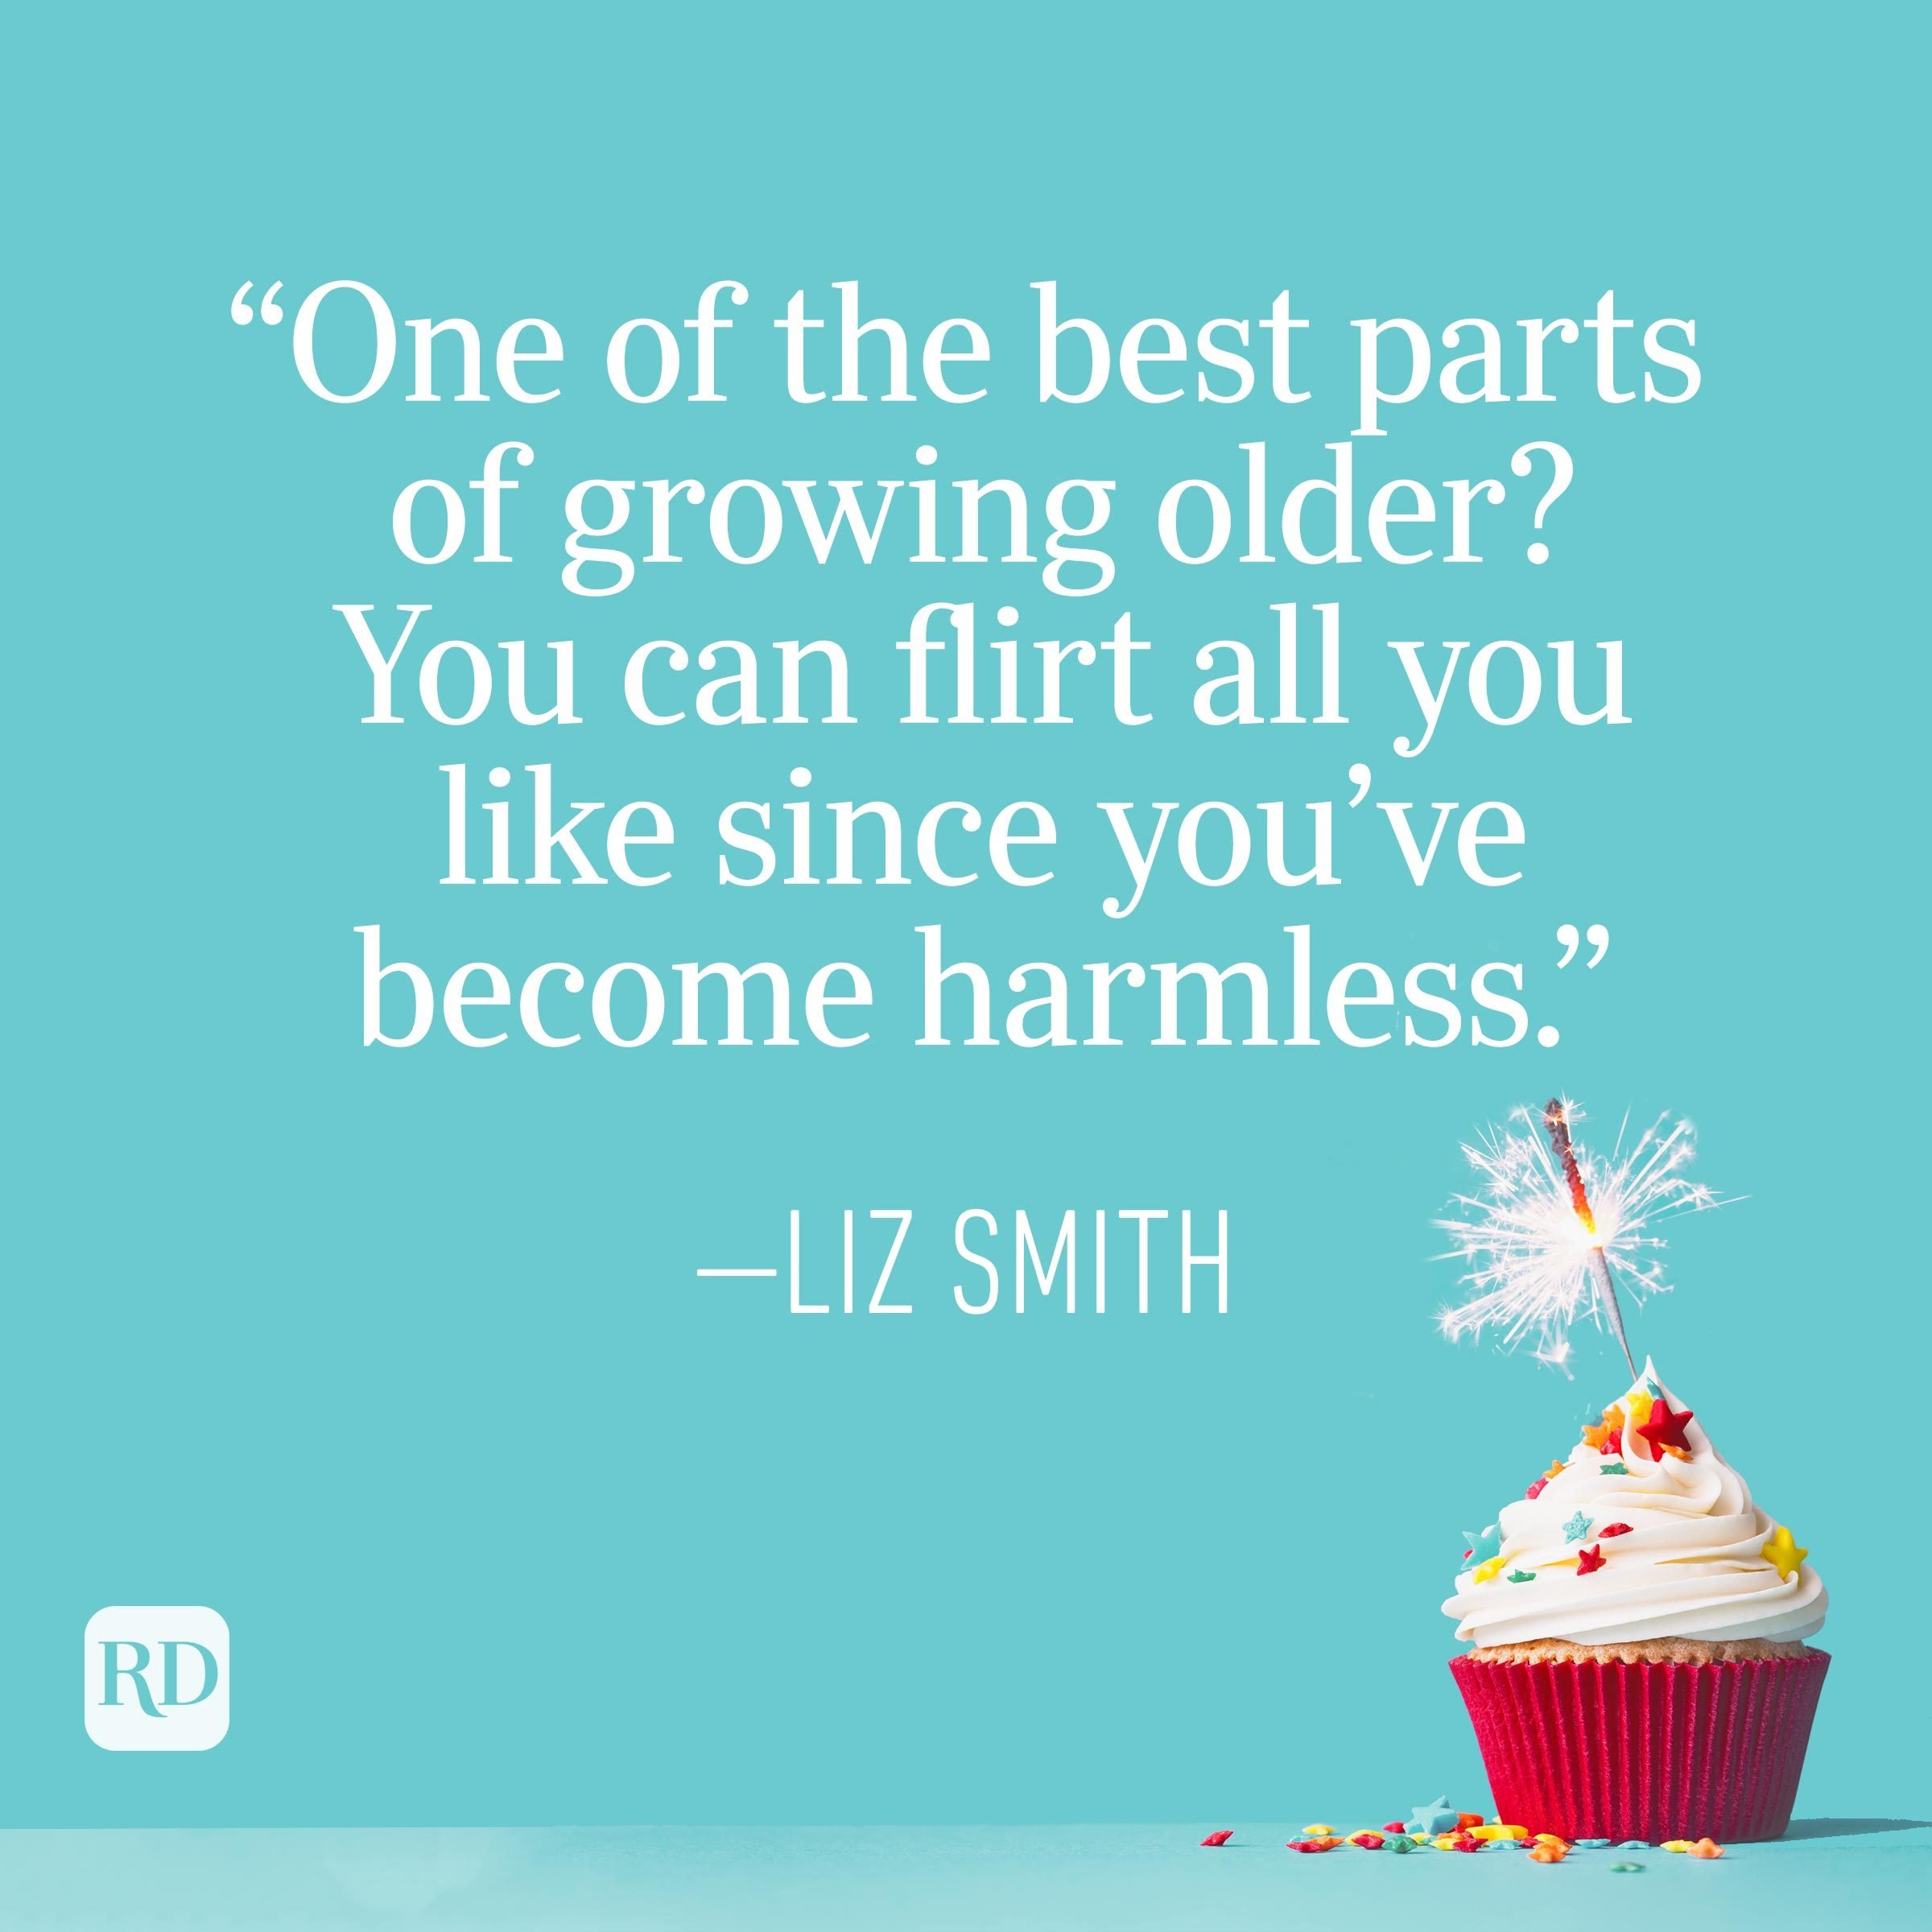 "One of the best parts of growing older? You can flirt all you like since you've become harmless." —Liz Smith